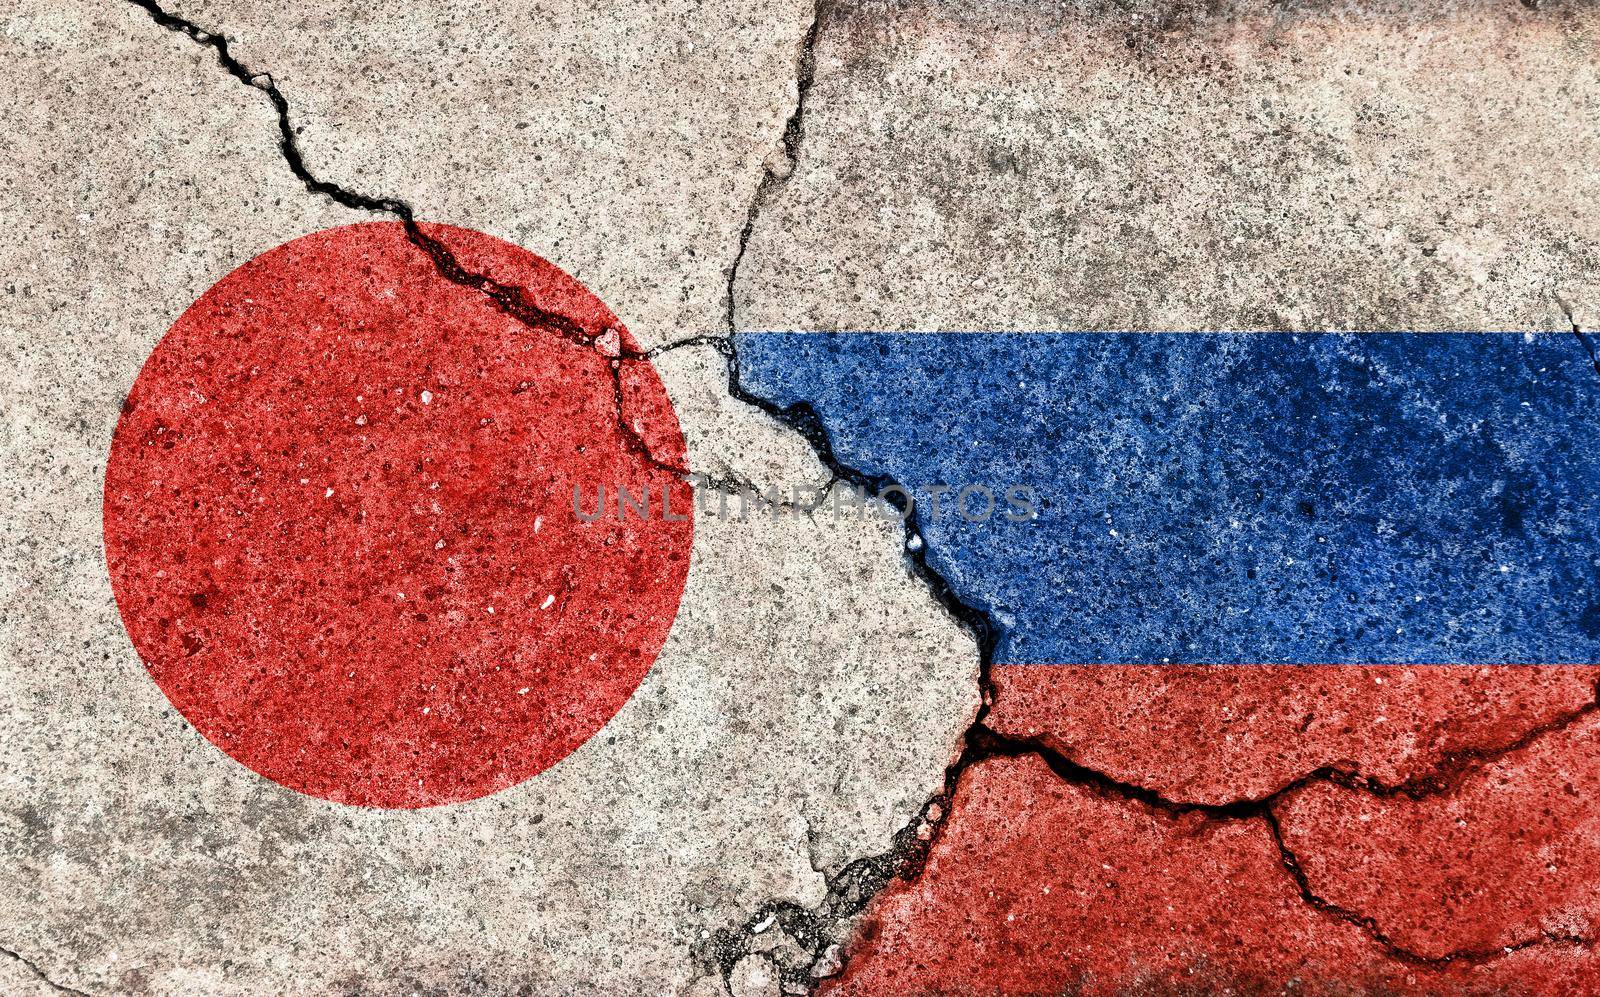 Grunge country flag illustration (cracked concrete background) / Japan vs Russia (Political or economic conflict) by barks